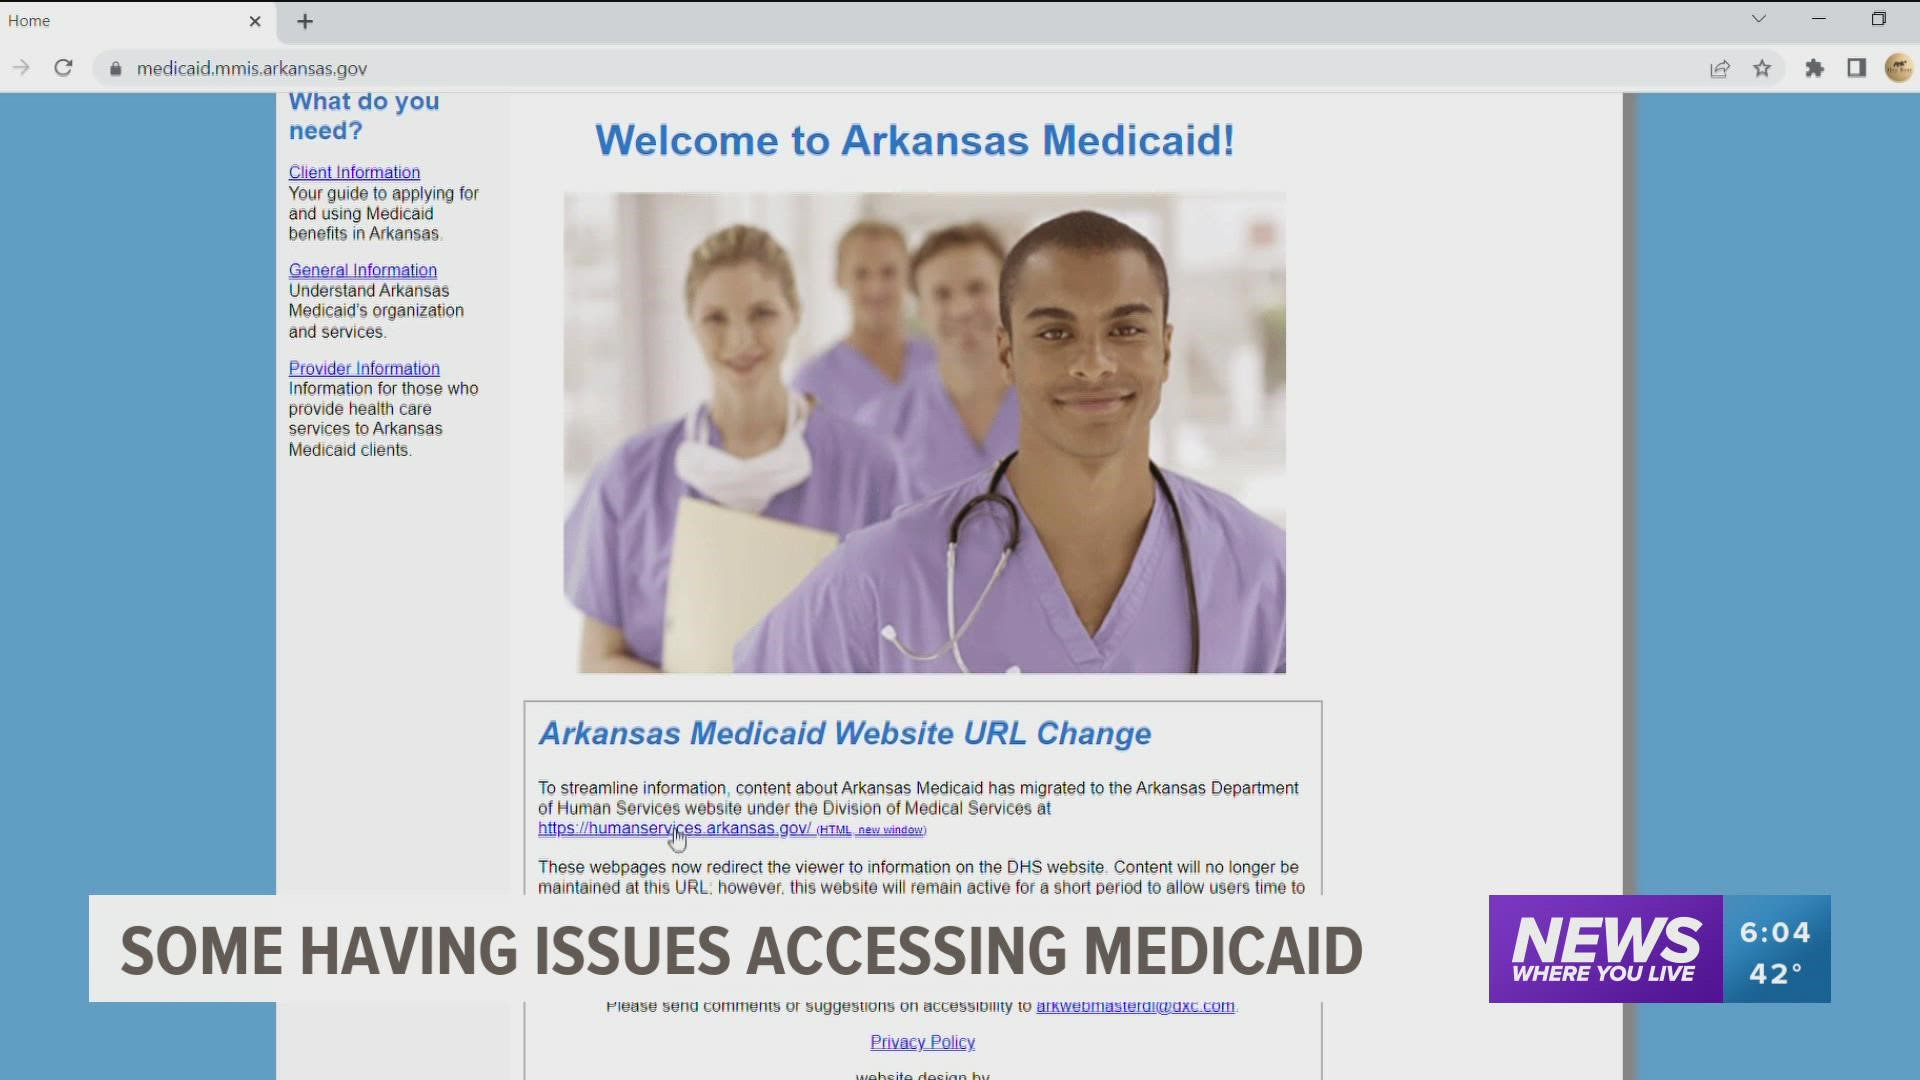 After hundreds of complaints, some Arkansas nonprofits are reaching out to the Department of Human Services to ask them to make some changes to the Medicaid website.